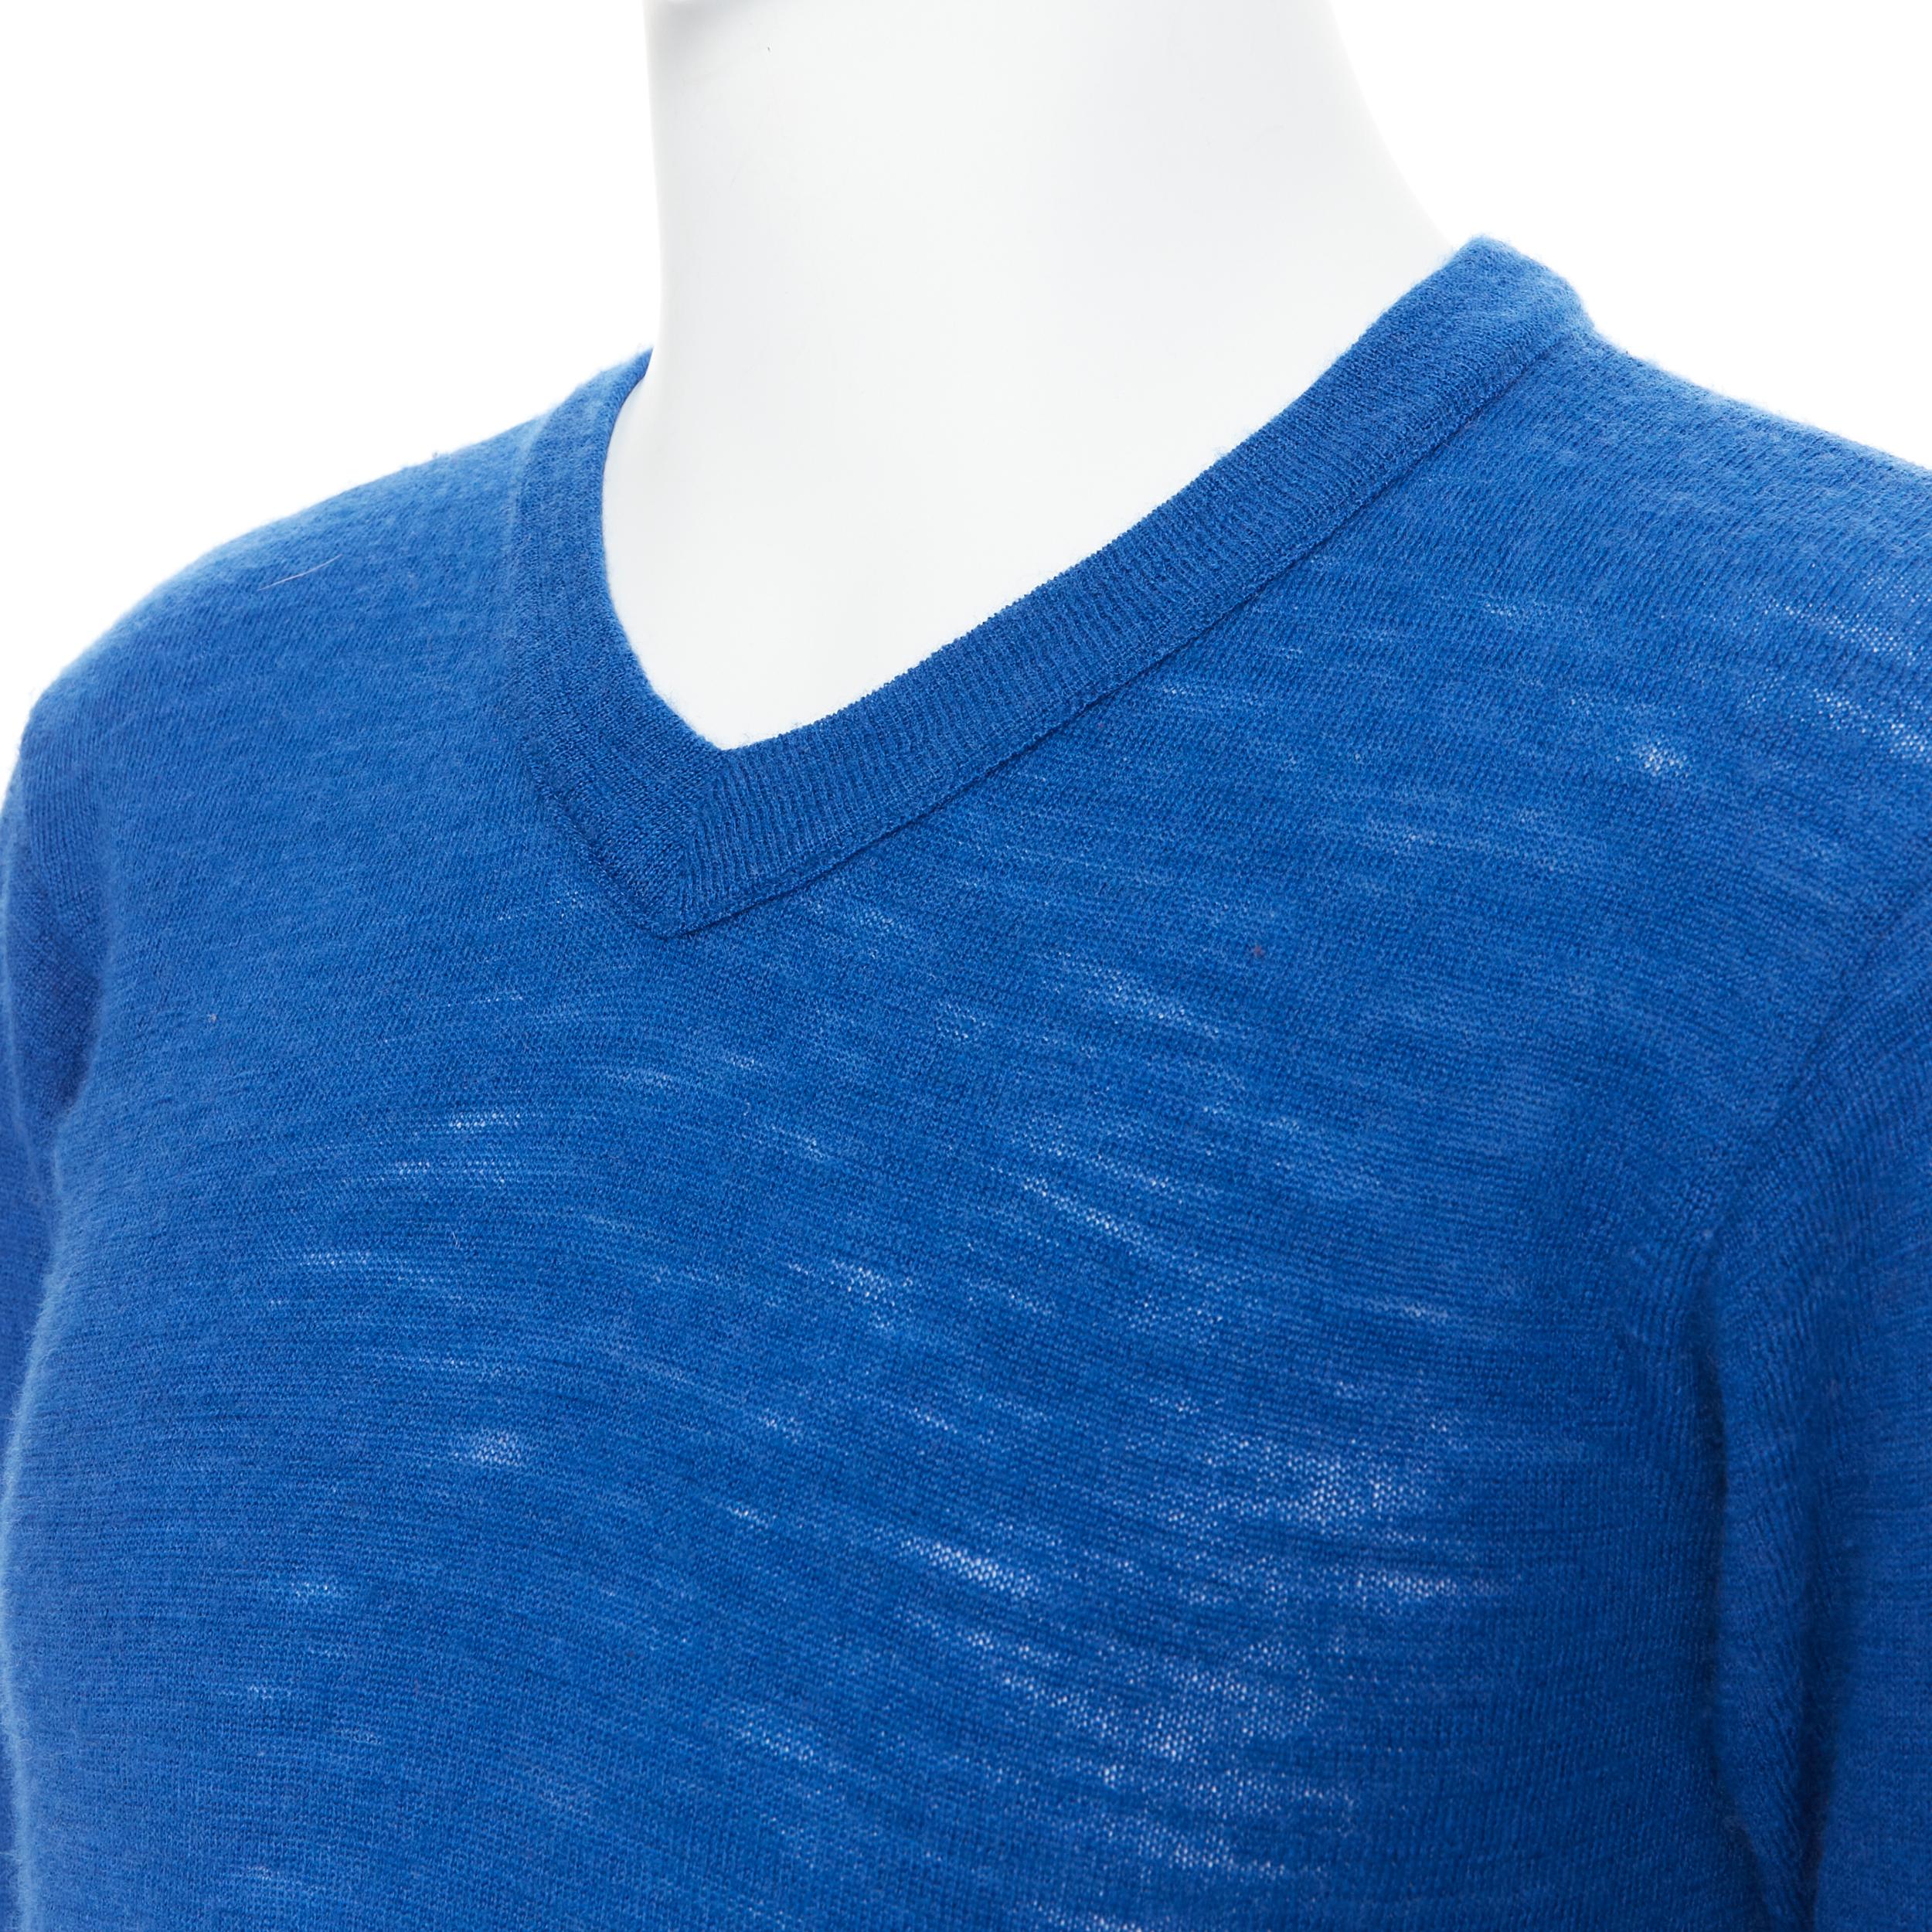 45R 100% wool cobalt blue V-neck long sleeve pullover sweater Sz 3 M 
Reference: PRCN/A00083 
Brand: 45R 
Material: Wool 
Color: Blue 
Pattern: Solid 
Extra Detail: 100% wool sweater. V-neck. 
Made in: Japan 

CONDITION: 
Condition: Very good, this